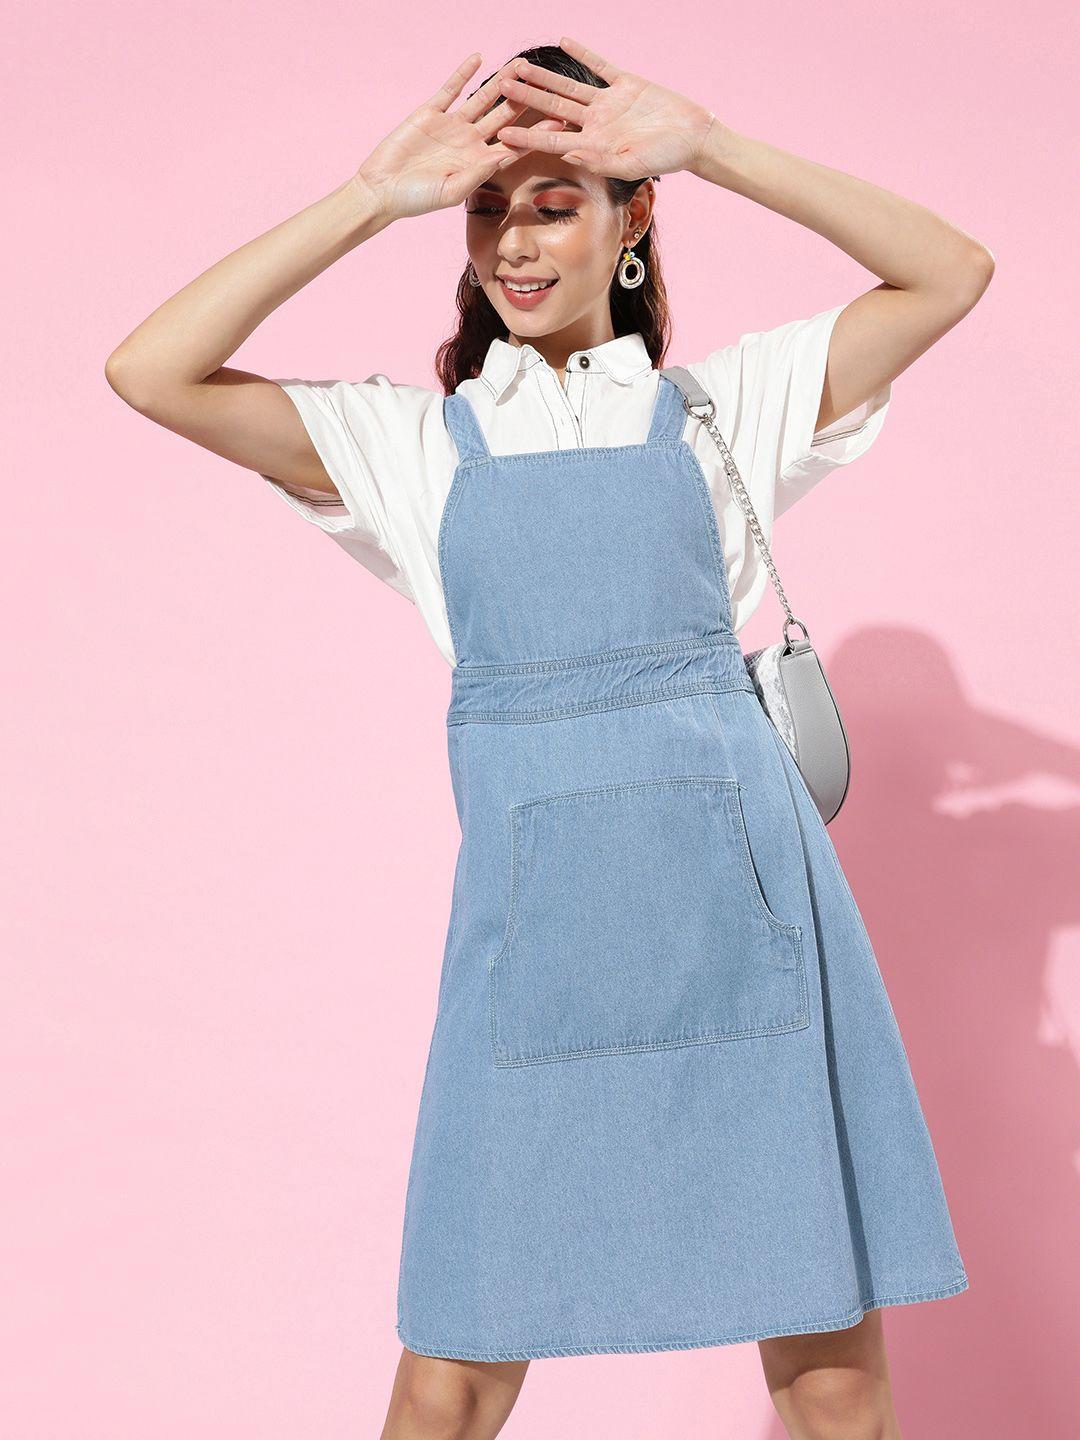 here&now powder blue retro optimism twofer takes chambray pinafore dress